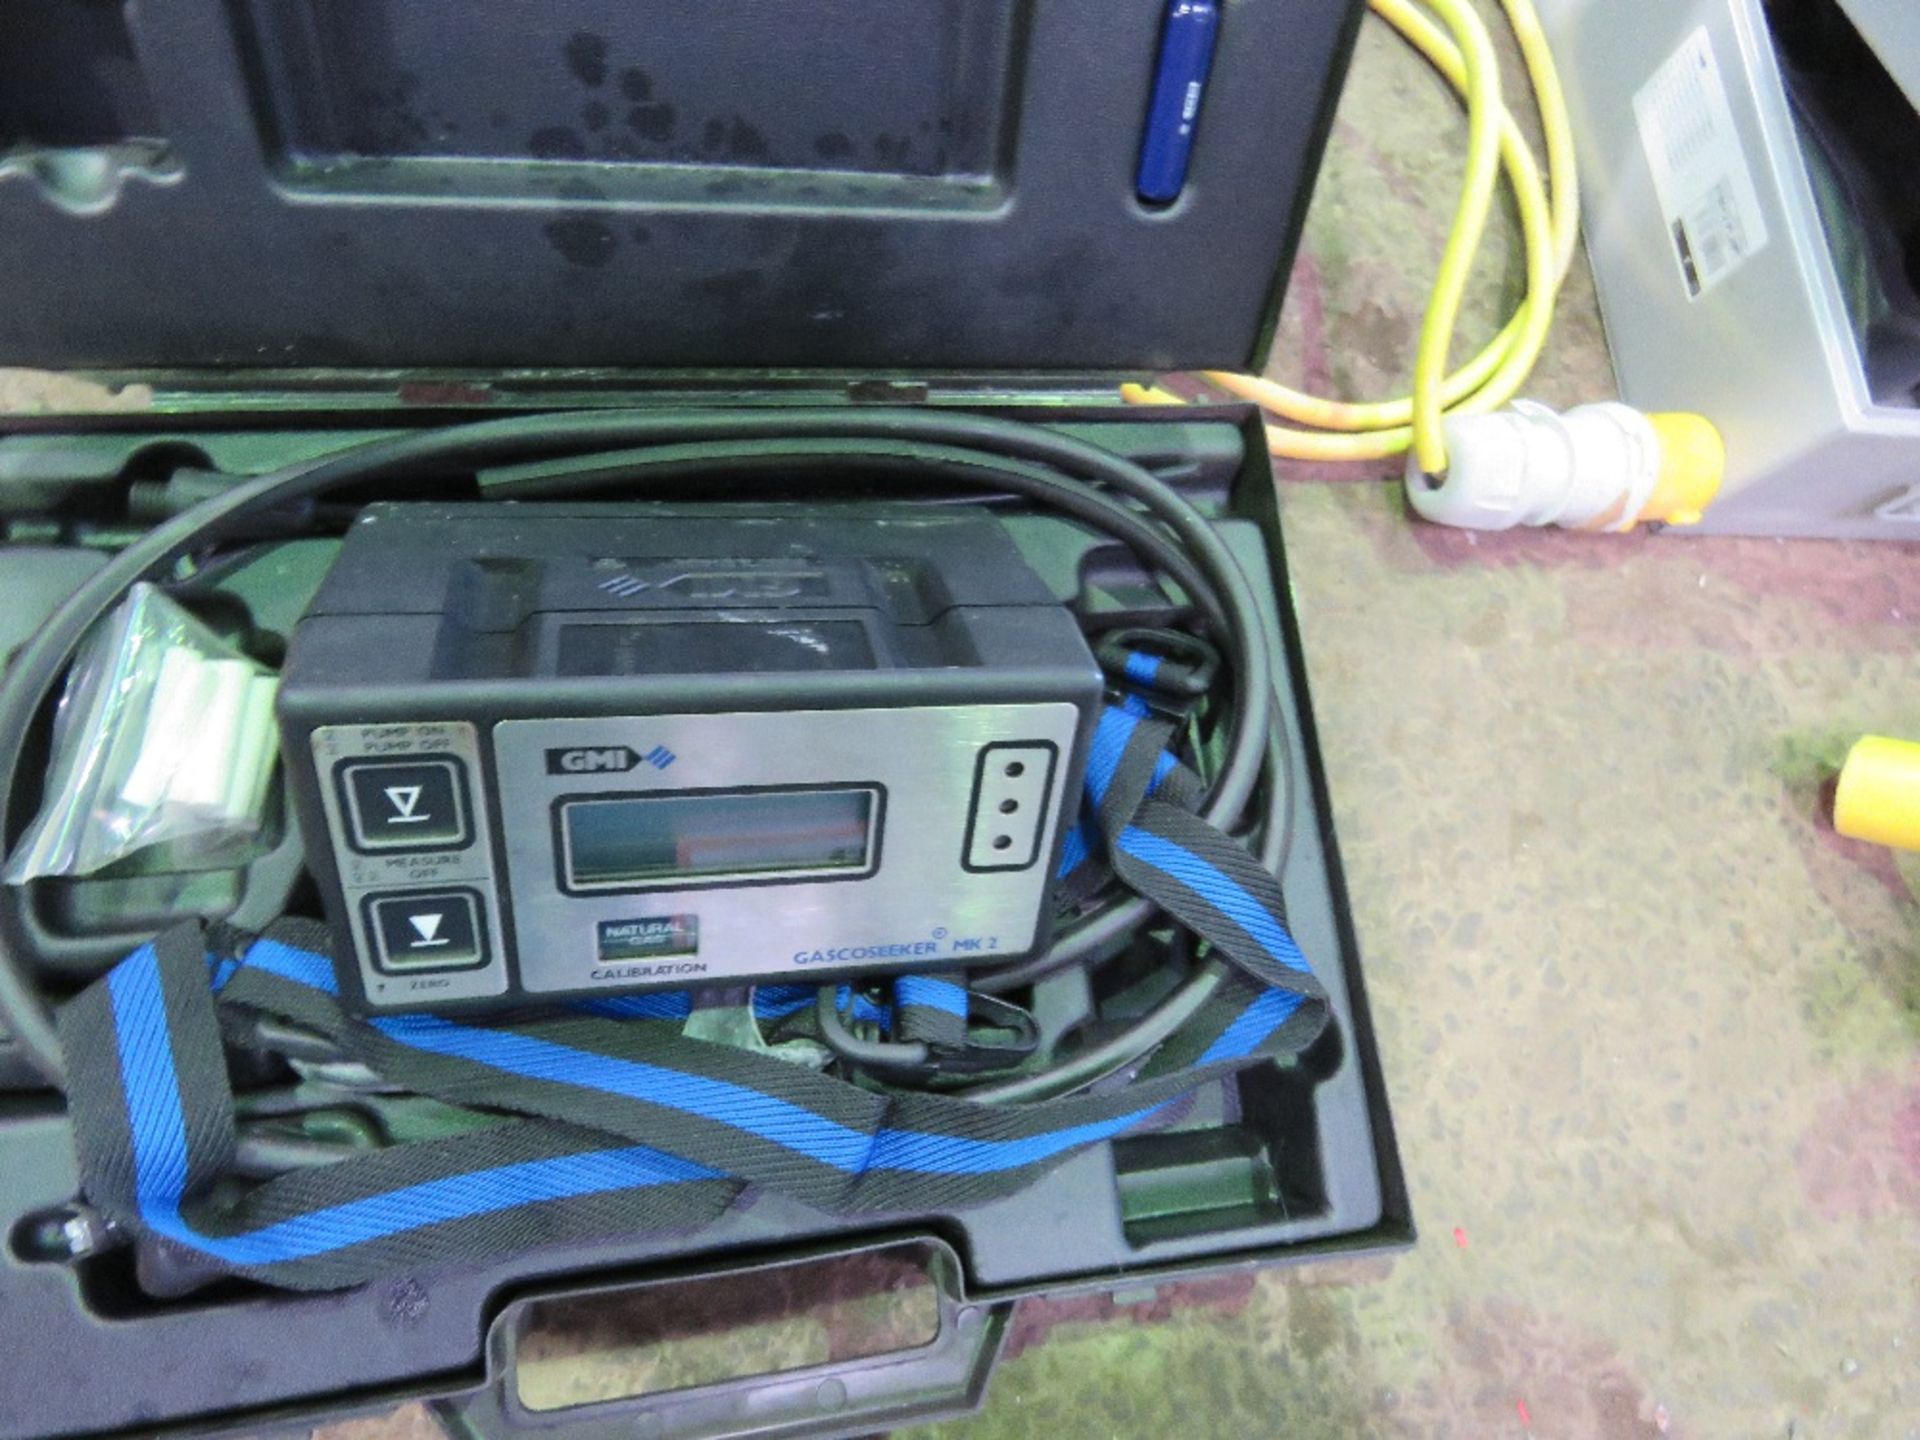 GASCOSEEKER MK2 GAS DETECTOR UNIT. SOURCED FROM LOCAL BUILDING COMPANY LIQUIDATION. - Image 4 of 4